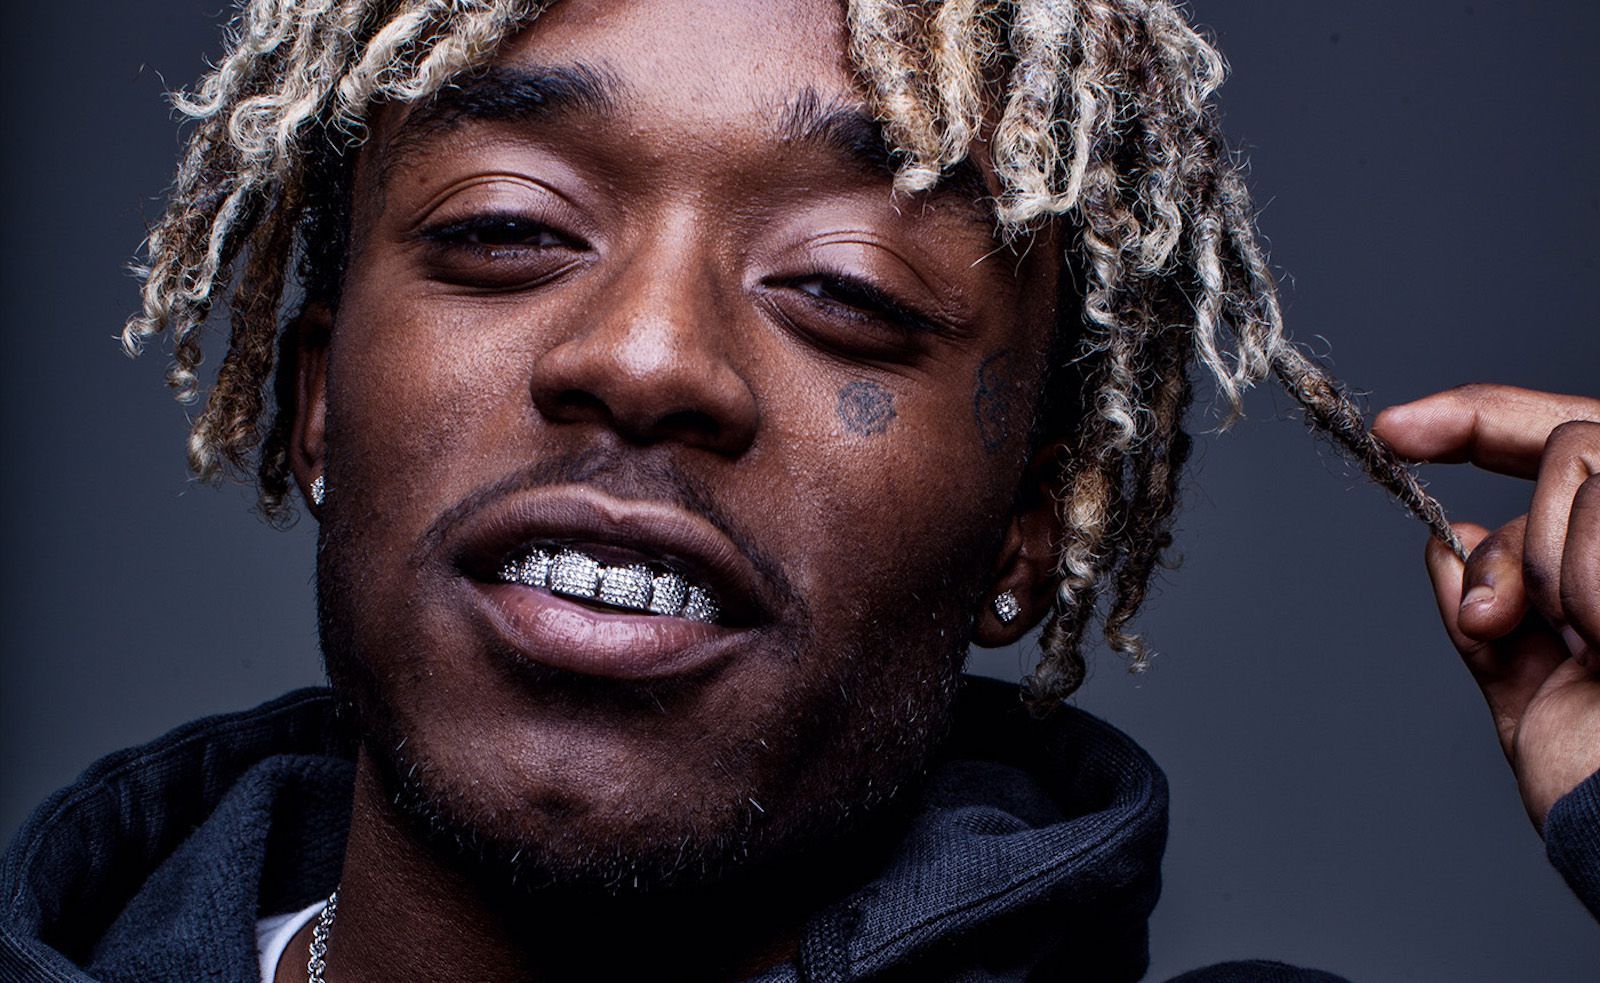 The Story of Lil Uzi Vert From the rise to the controversies we tell the trap tale